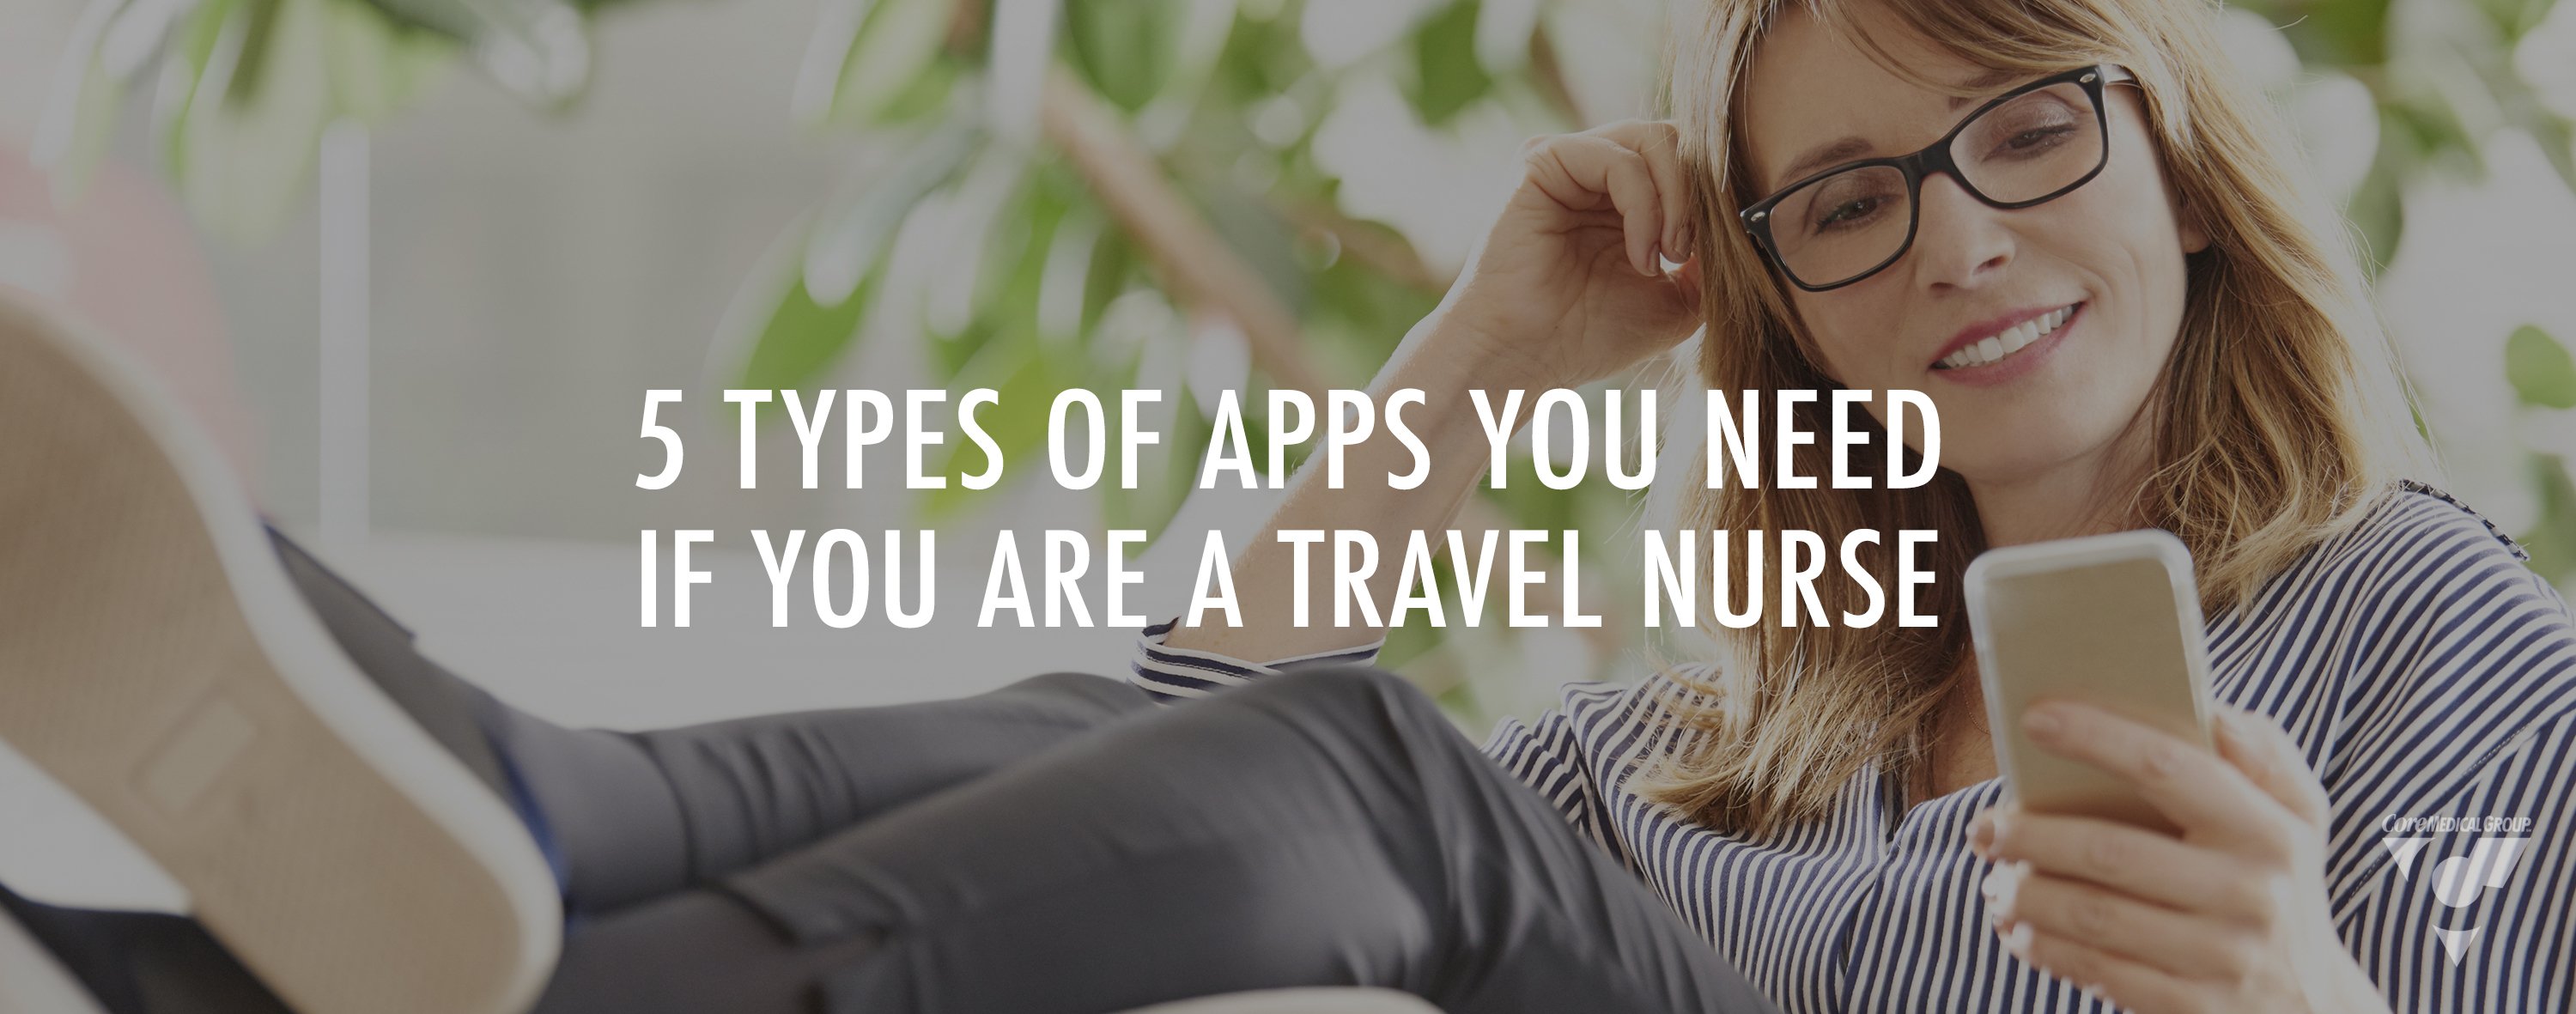 CMG Blog: 5 Types of Apps You Need if You Are a Travel Nurse